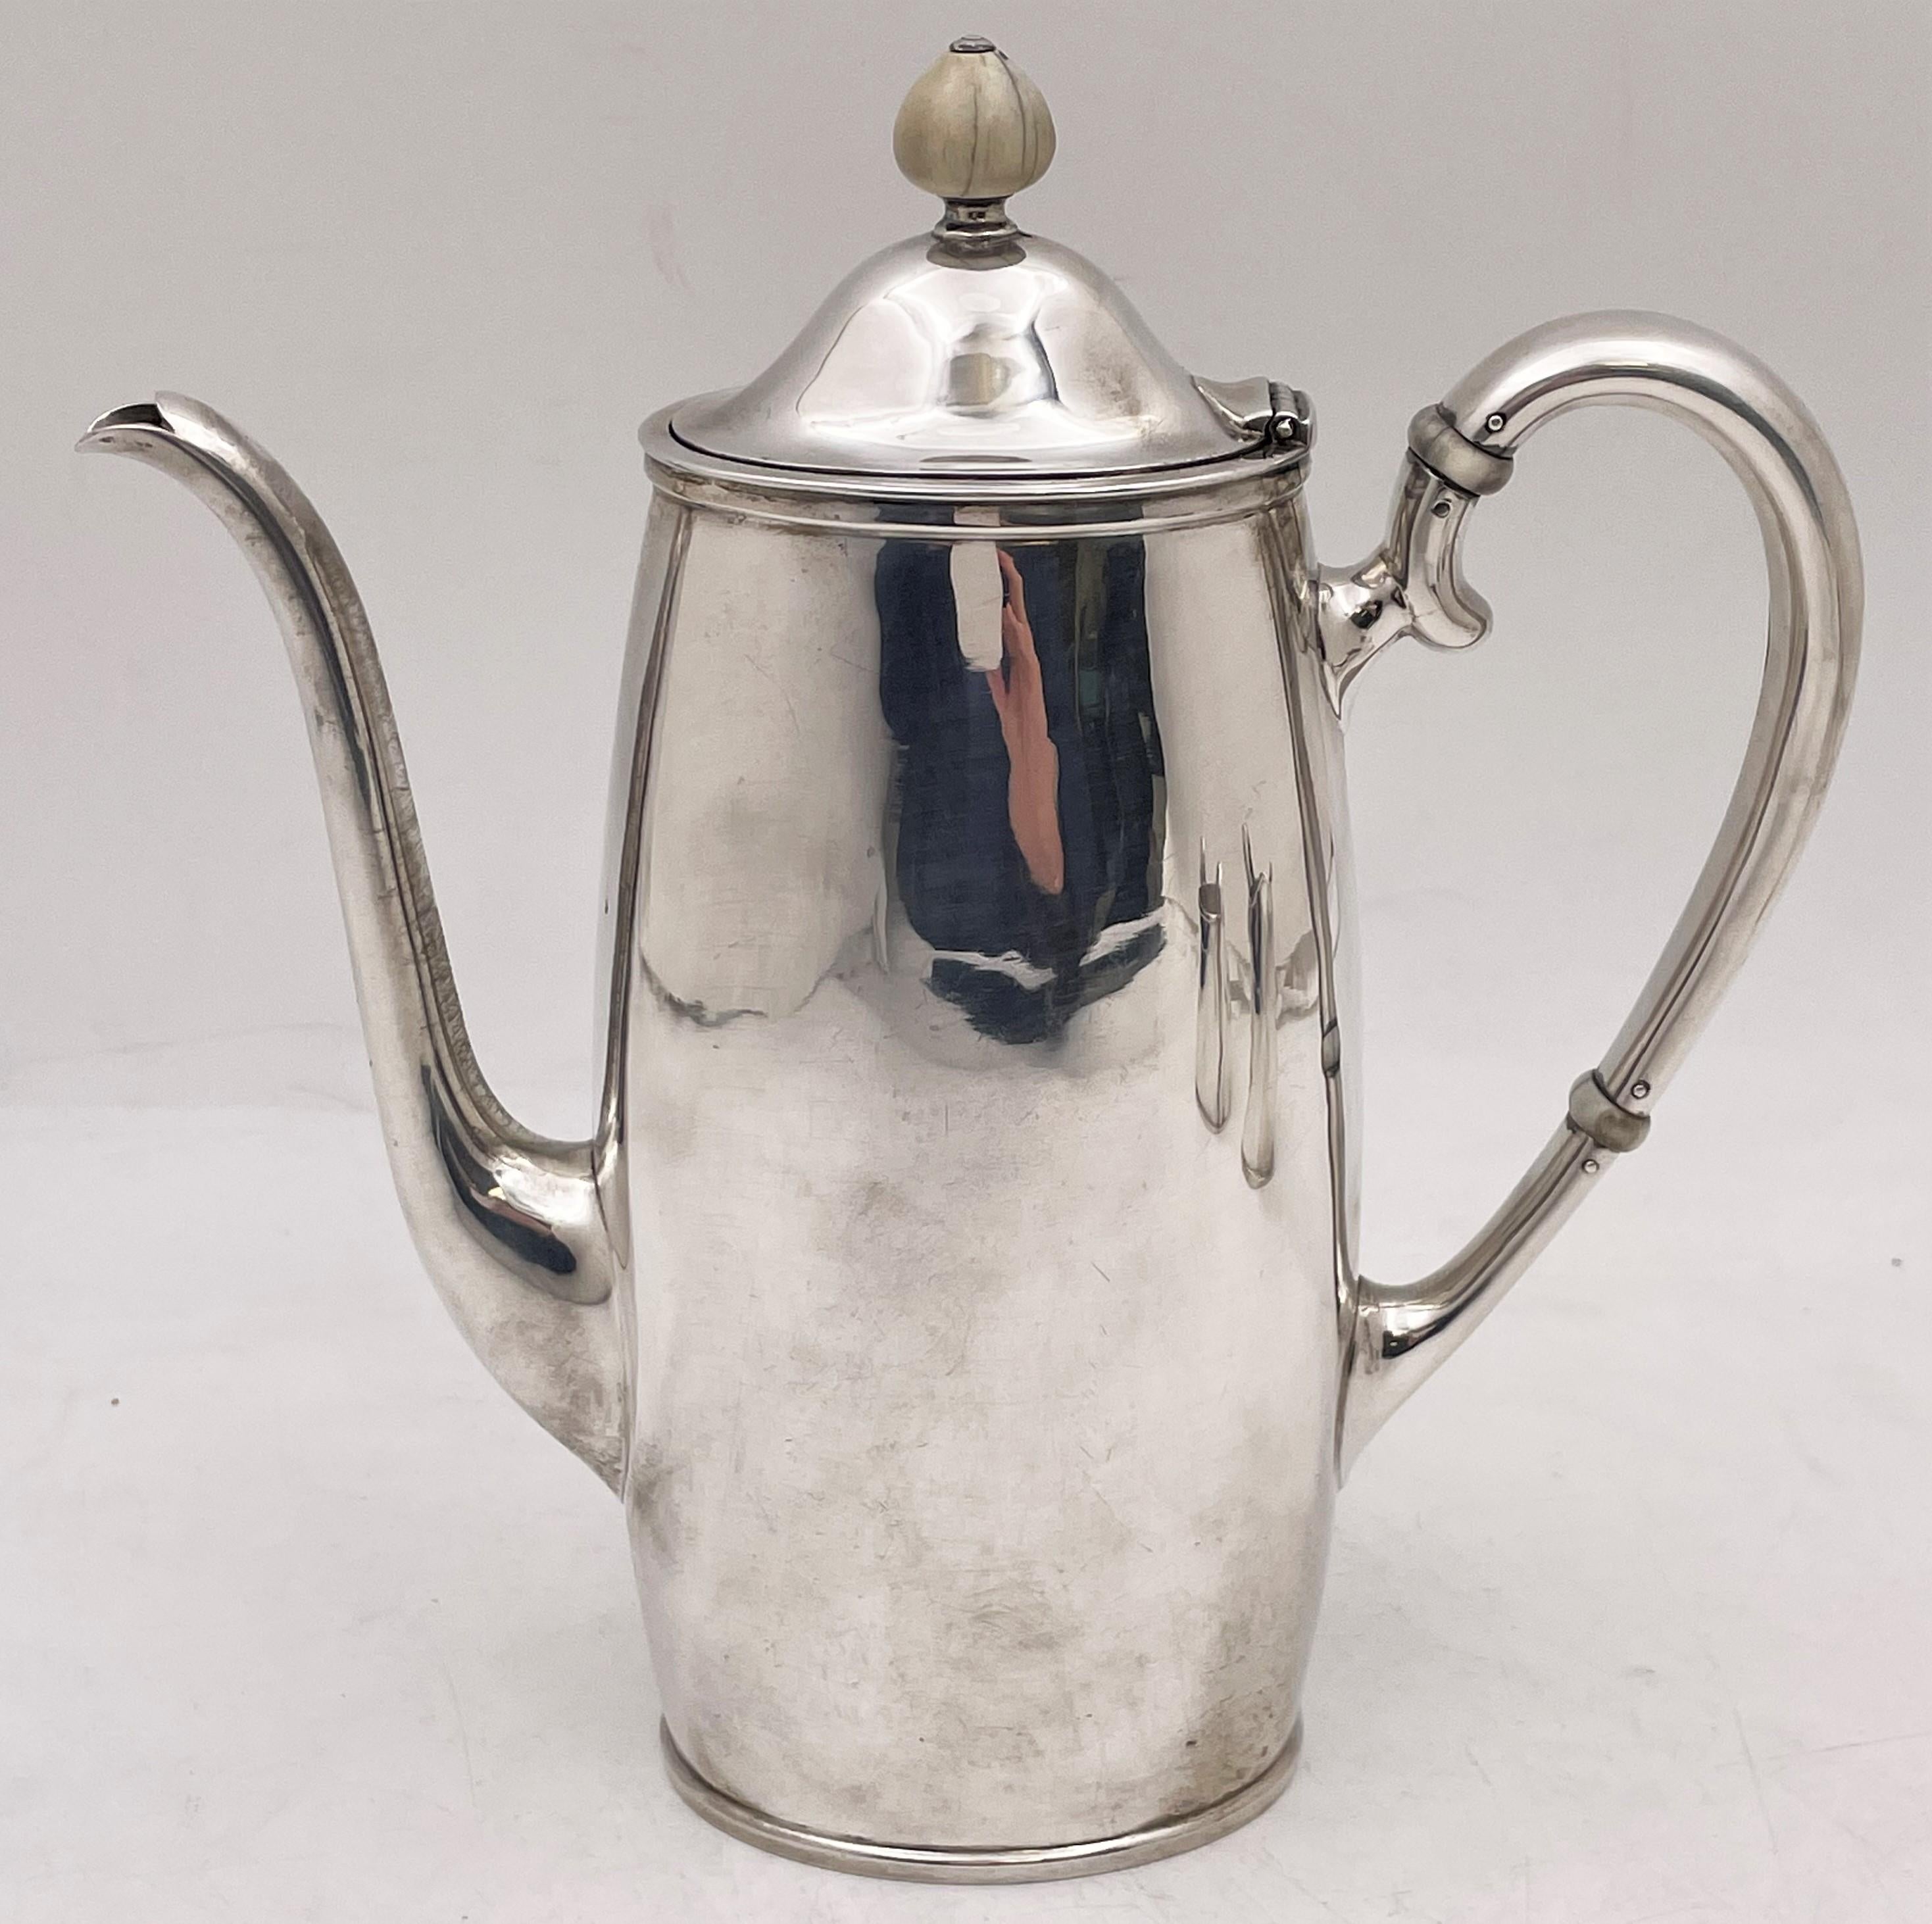 Arthur Stone, hand hammered sterling silver 3-piece demitasse set in Arts & Crafts style from the early 20th century. This elegant set exhibits the attention to geometric, curvilinear design typical of the Arts & Crafts movement, and consists